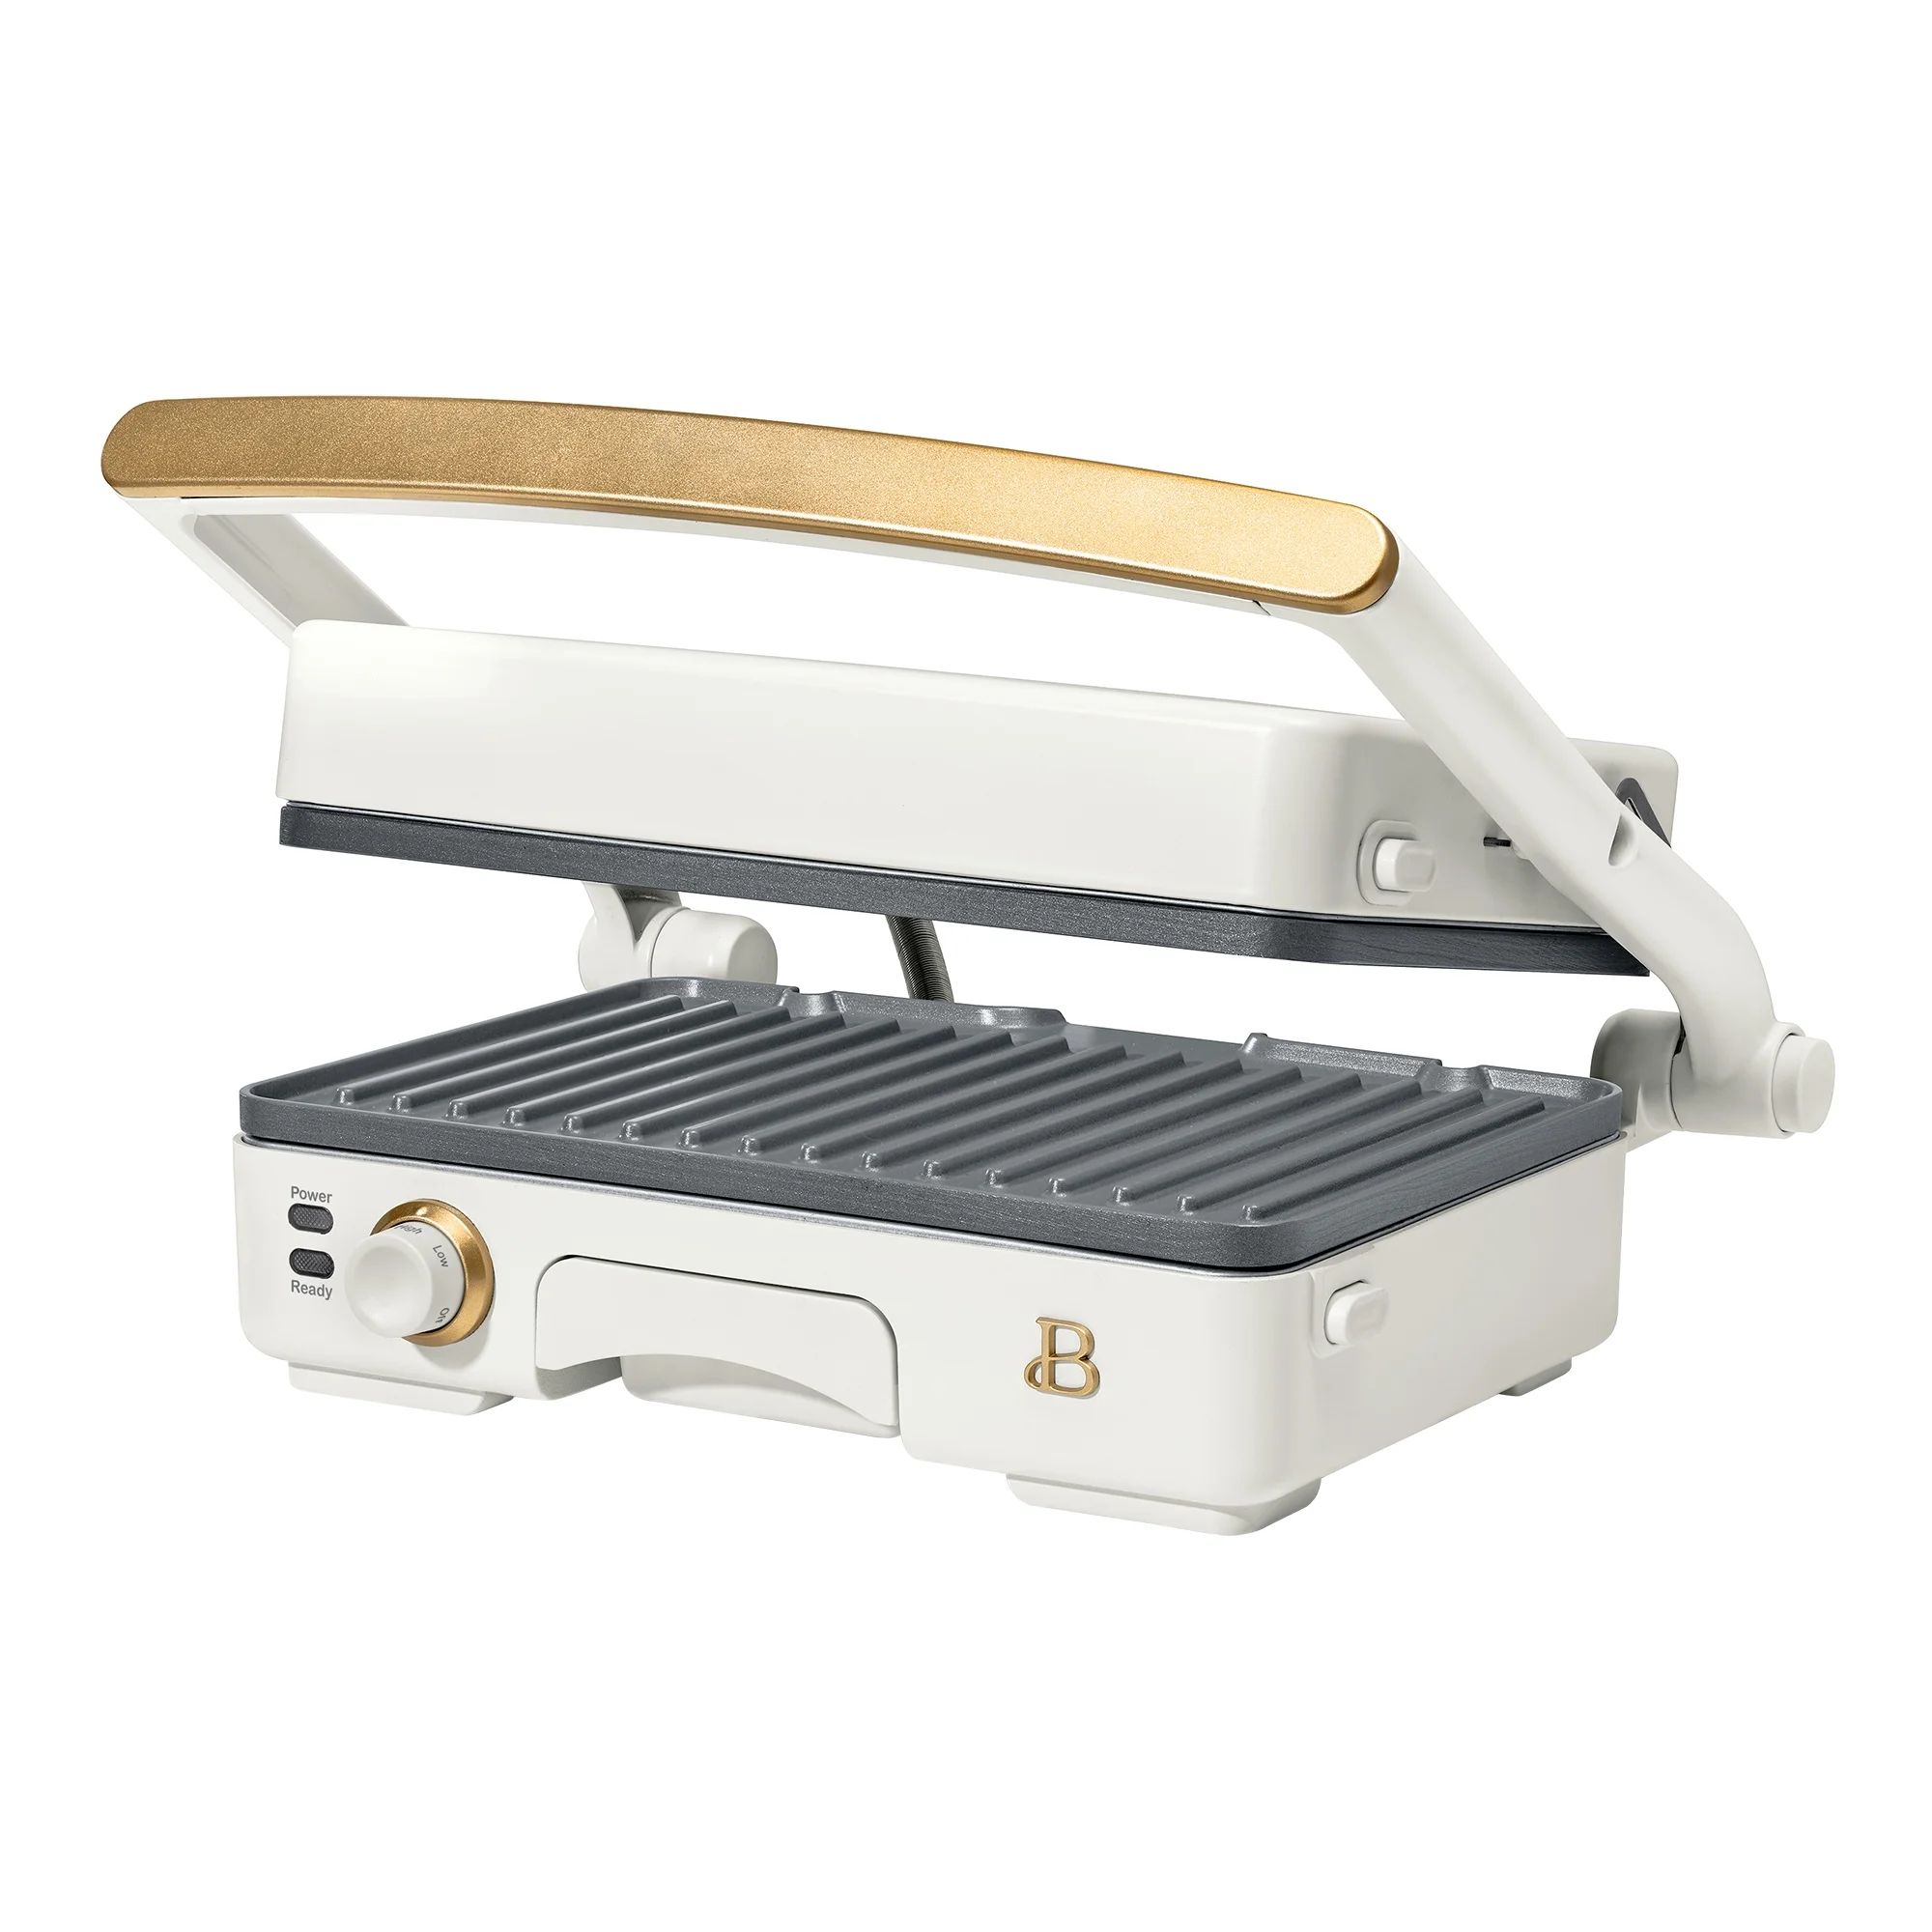 Beautiful 2-in-1 Panini Press & Grill, White Icing by Drew Barrymore | Walmart (US)